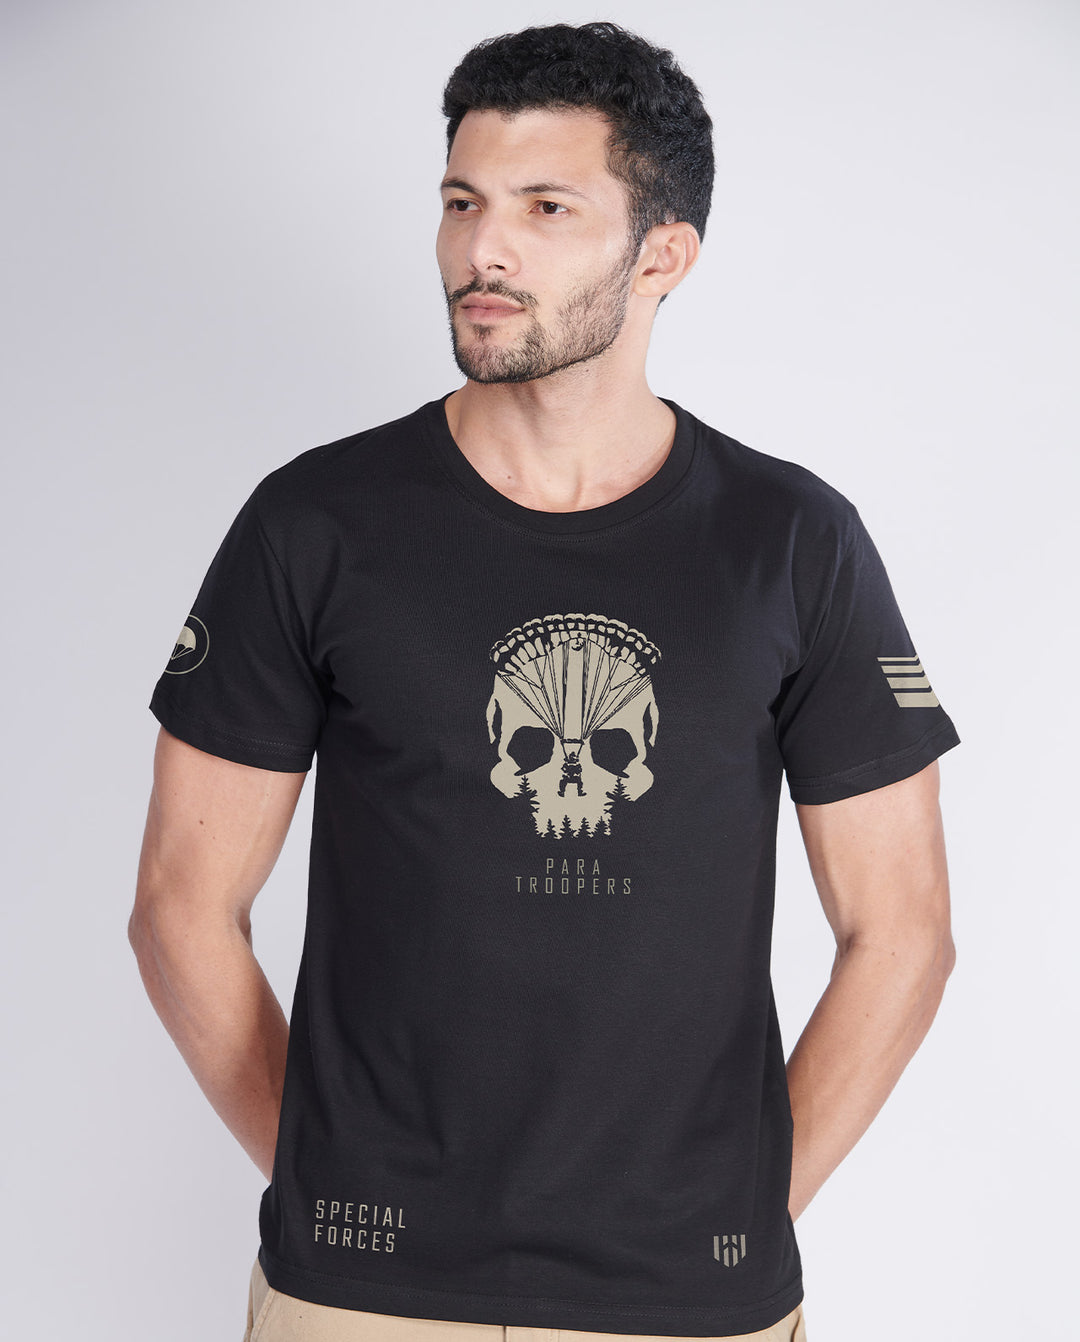 PARA TROOPERS SPECIAL EDITION T-Shirt